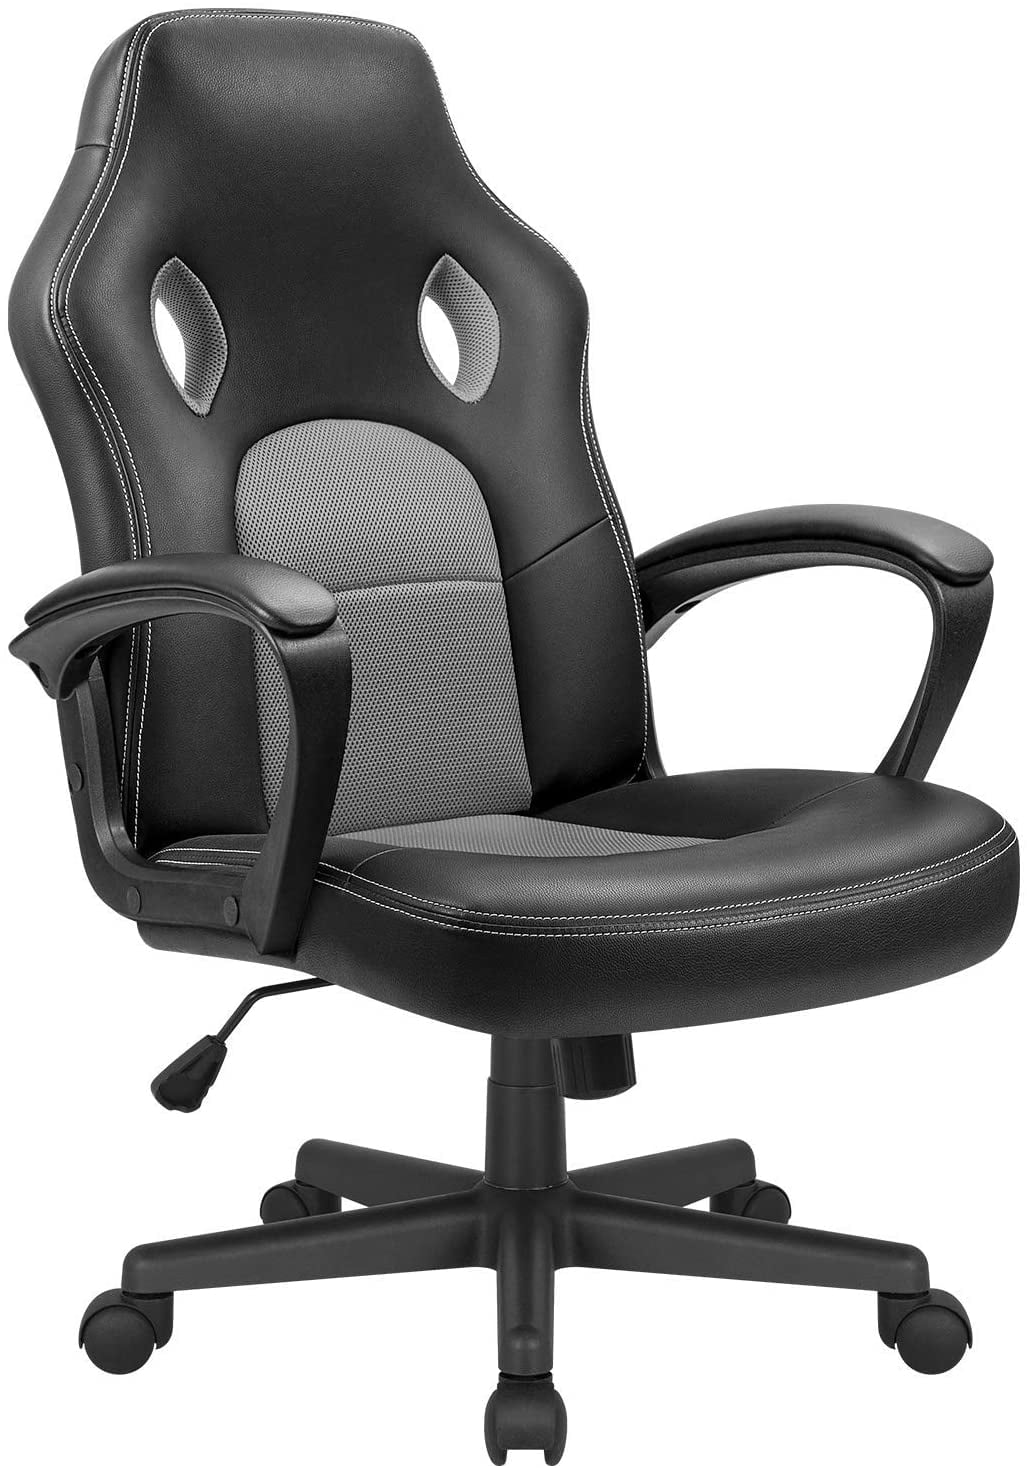 Blue Kaimeng Office Chair Desk Leather Gaming Chair High Back Ergonomic Adjustable Racing Chair Executive Computer Chair 